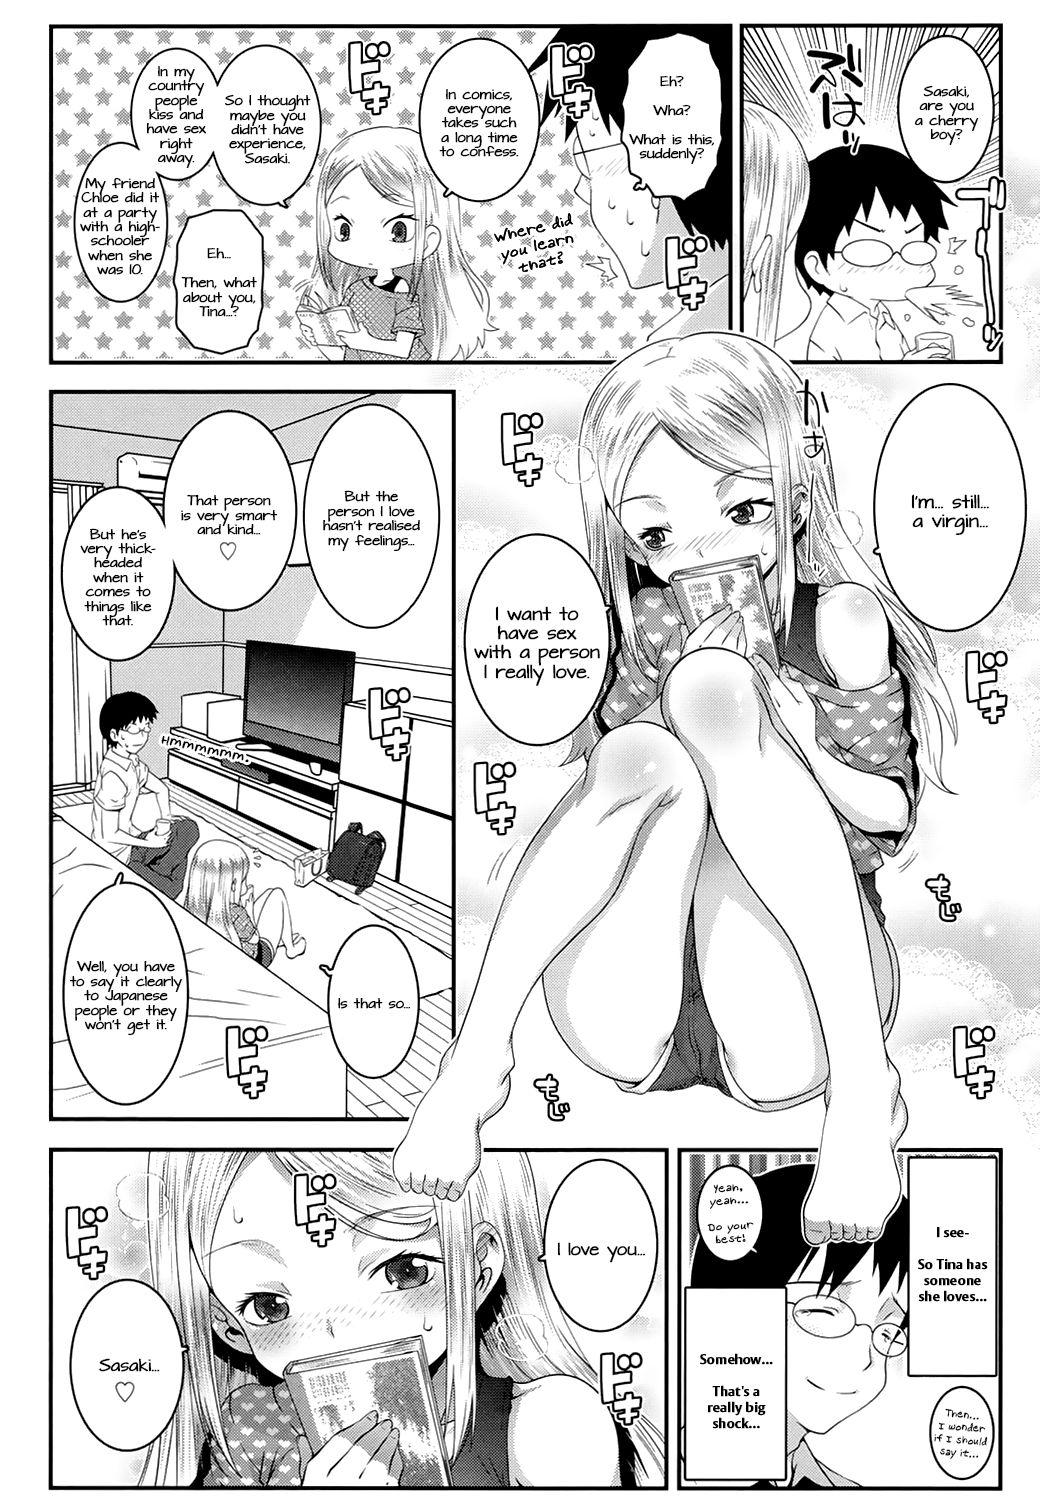 Class Room Made In Japan 18 Porn - Page 4